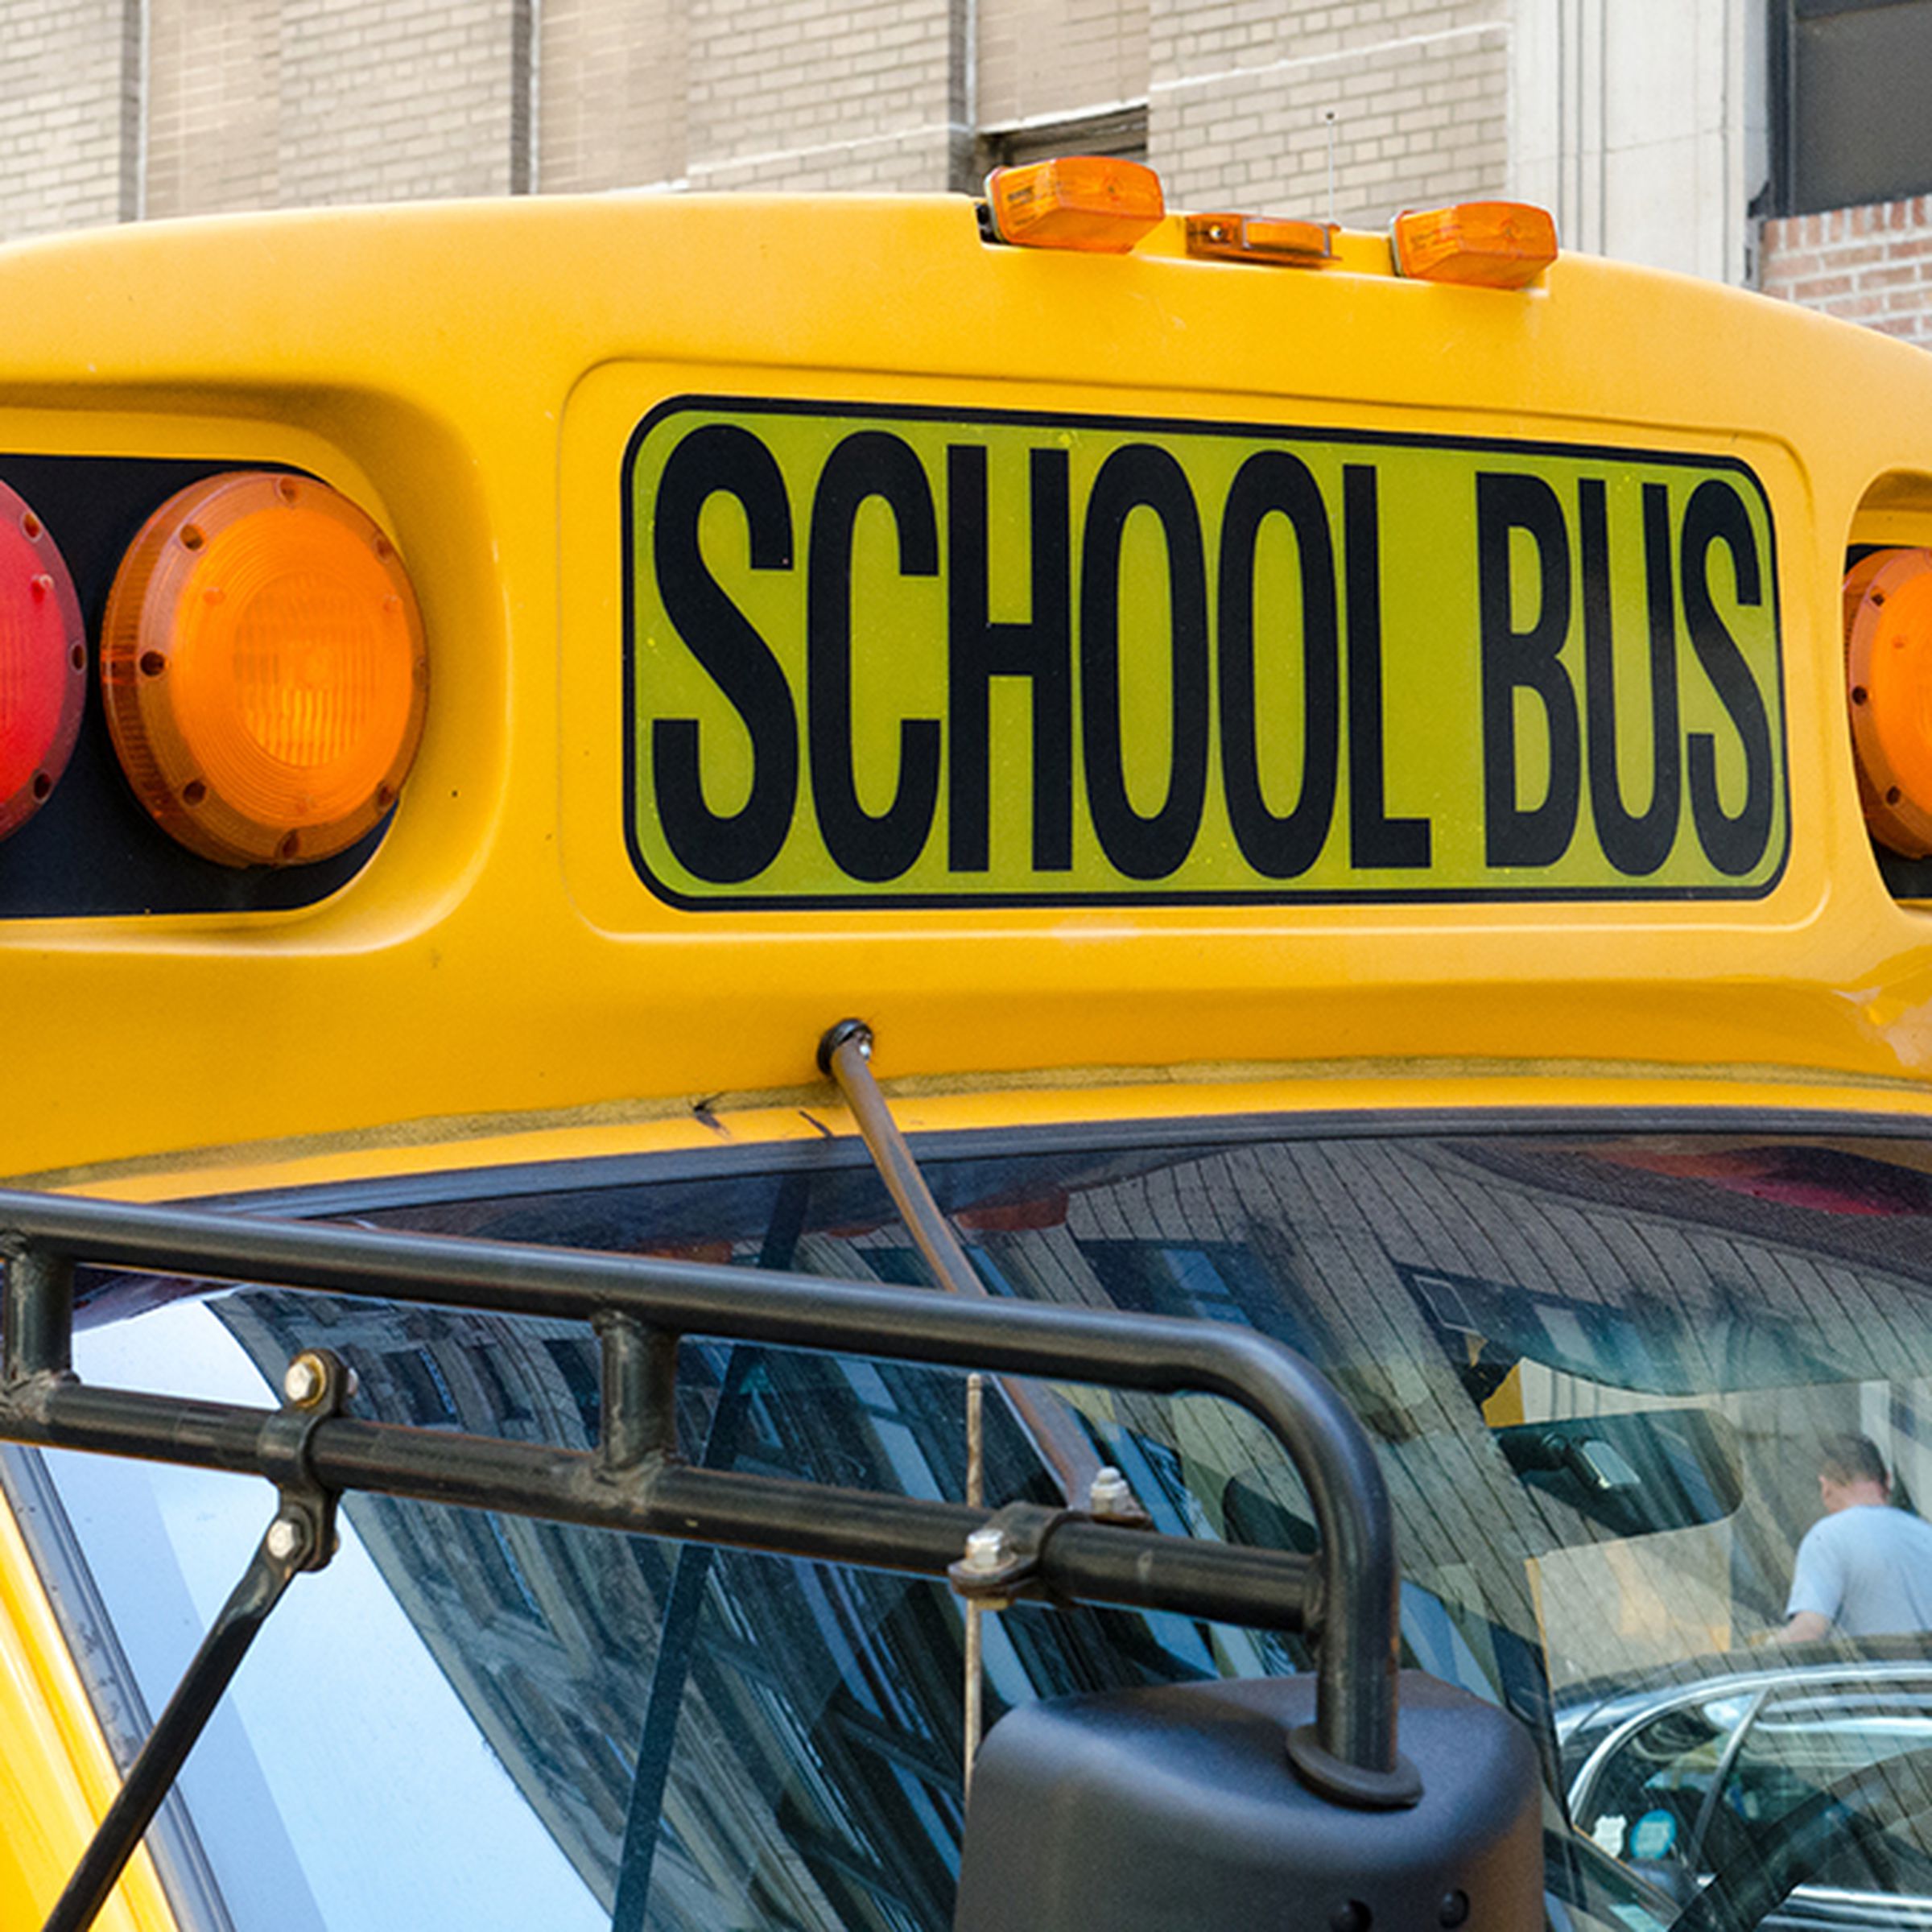 A stock photo of a school bus